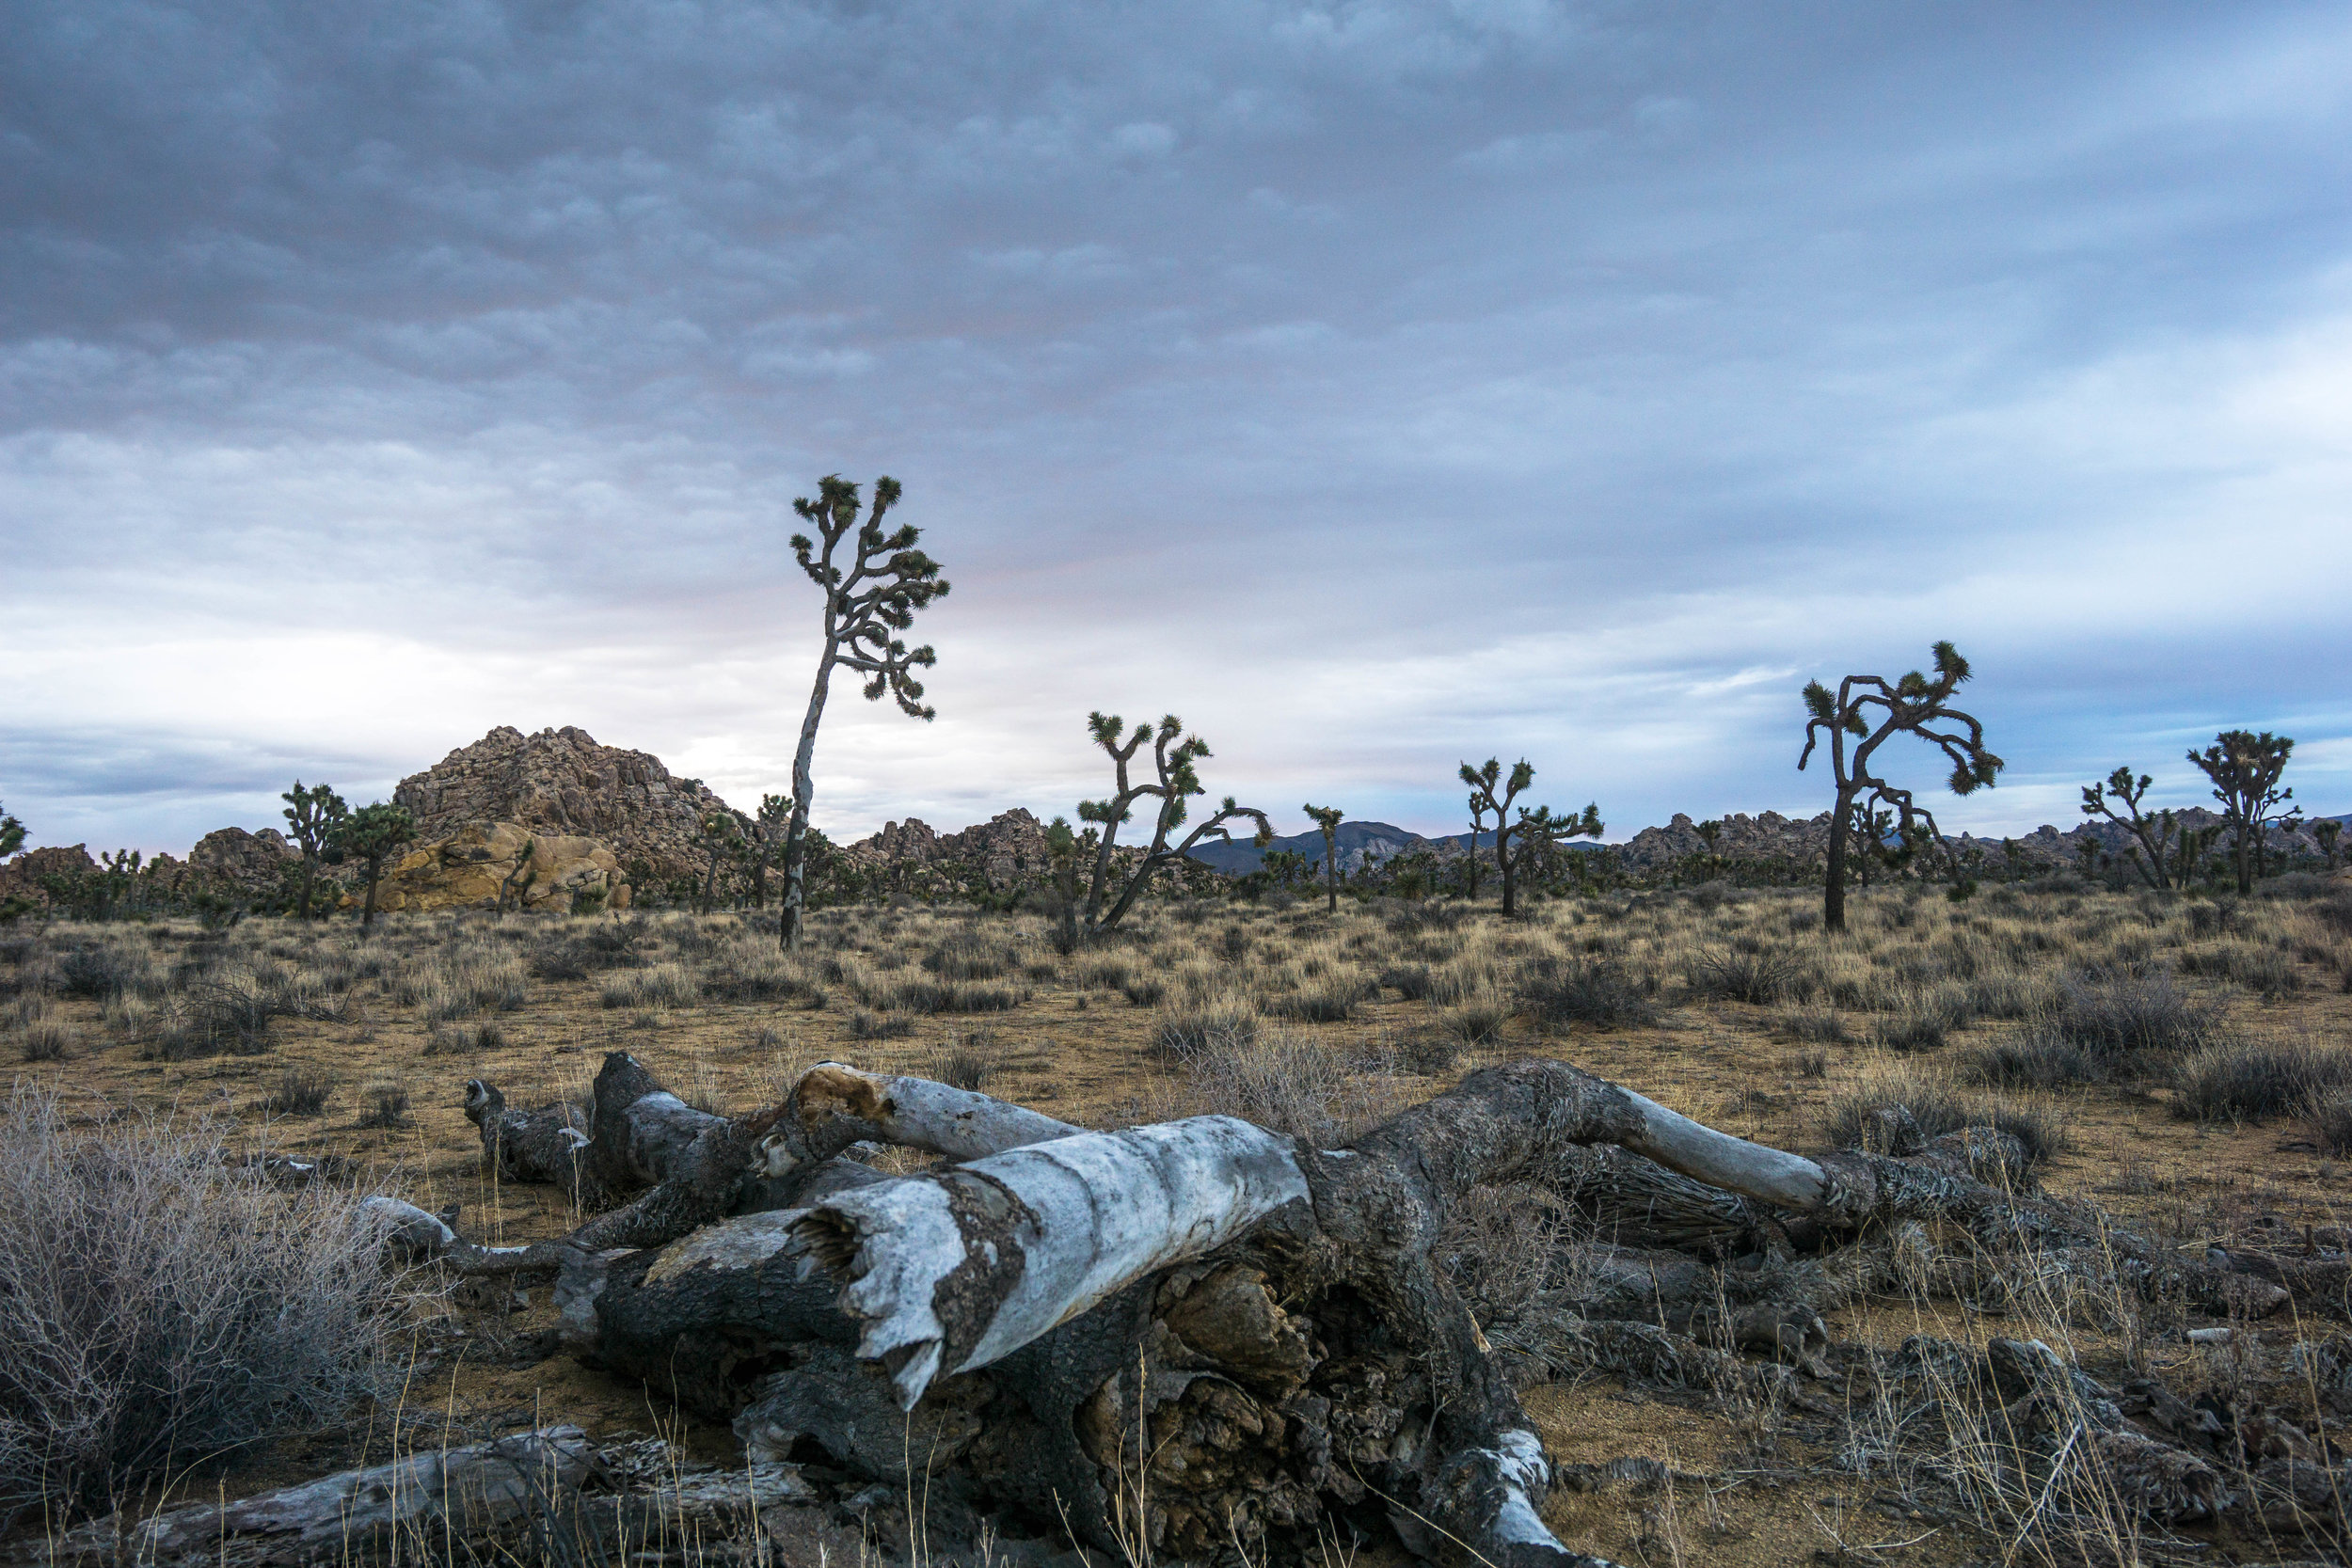 A fallen Joshua Tree rests among a forest of old friends. A small reminder that nothing is permanent.